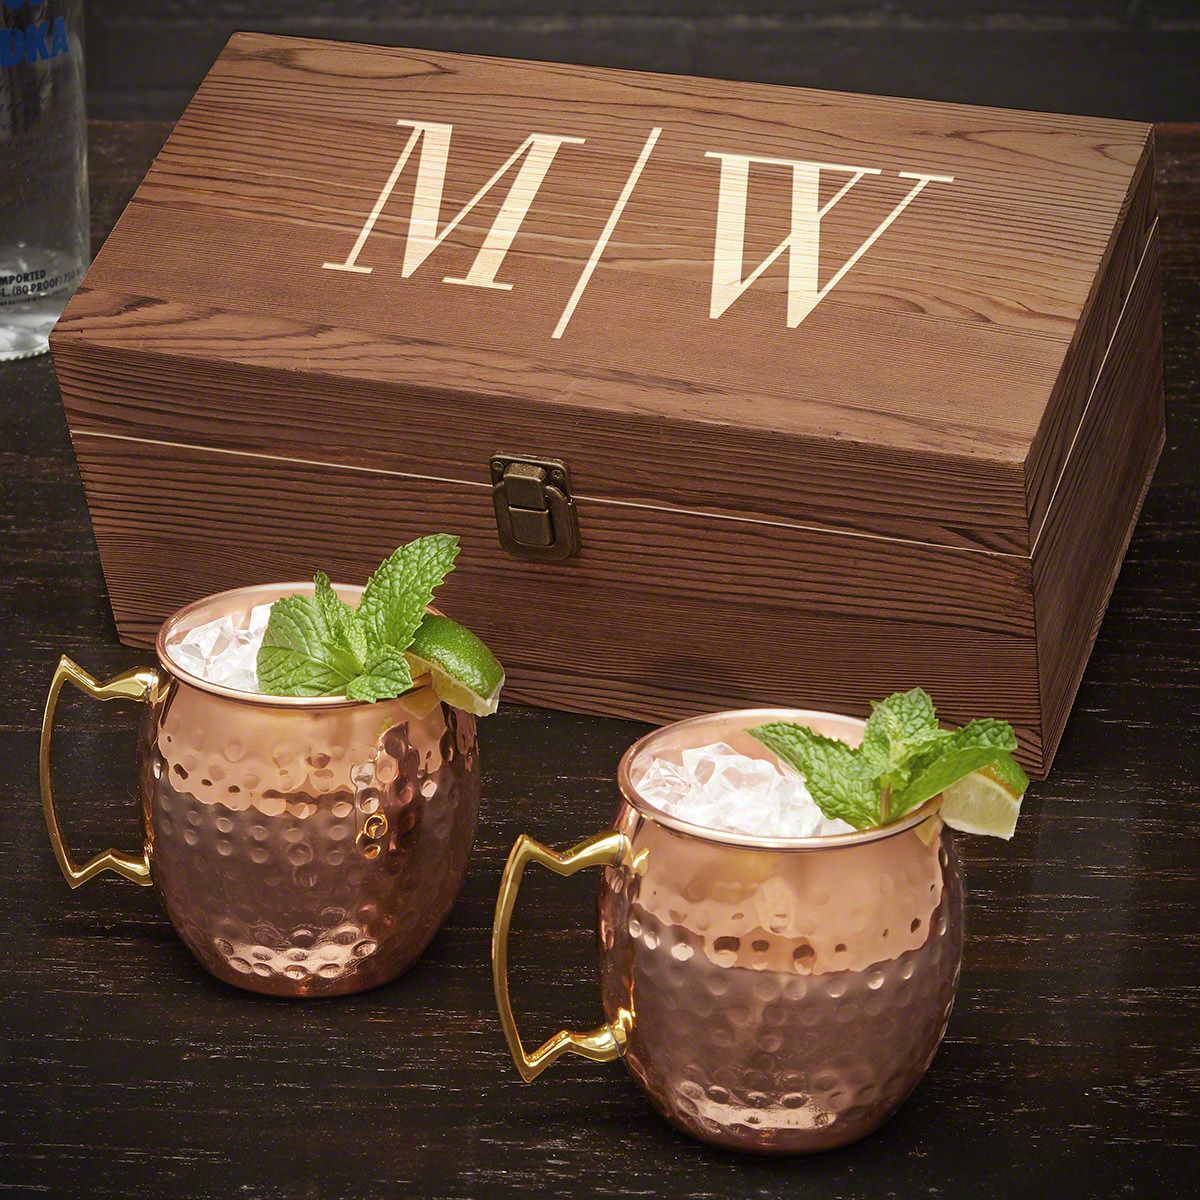 Quinton Personalized Moscow Mule Gift Set